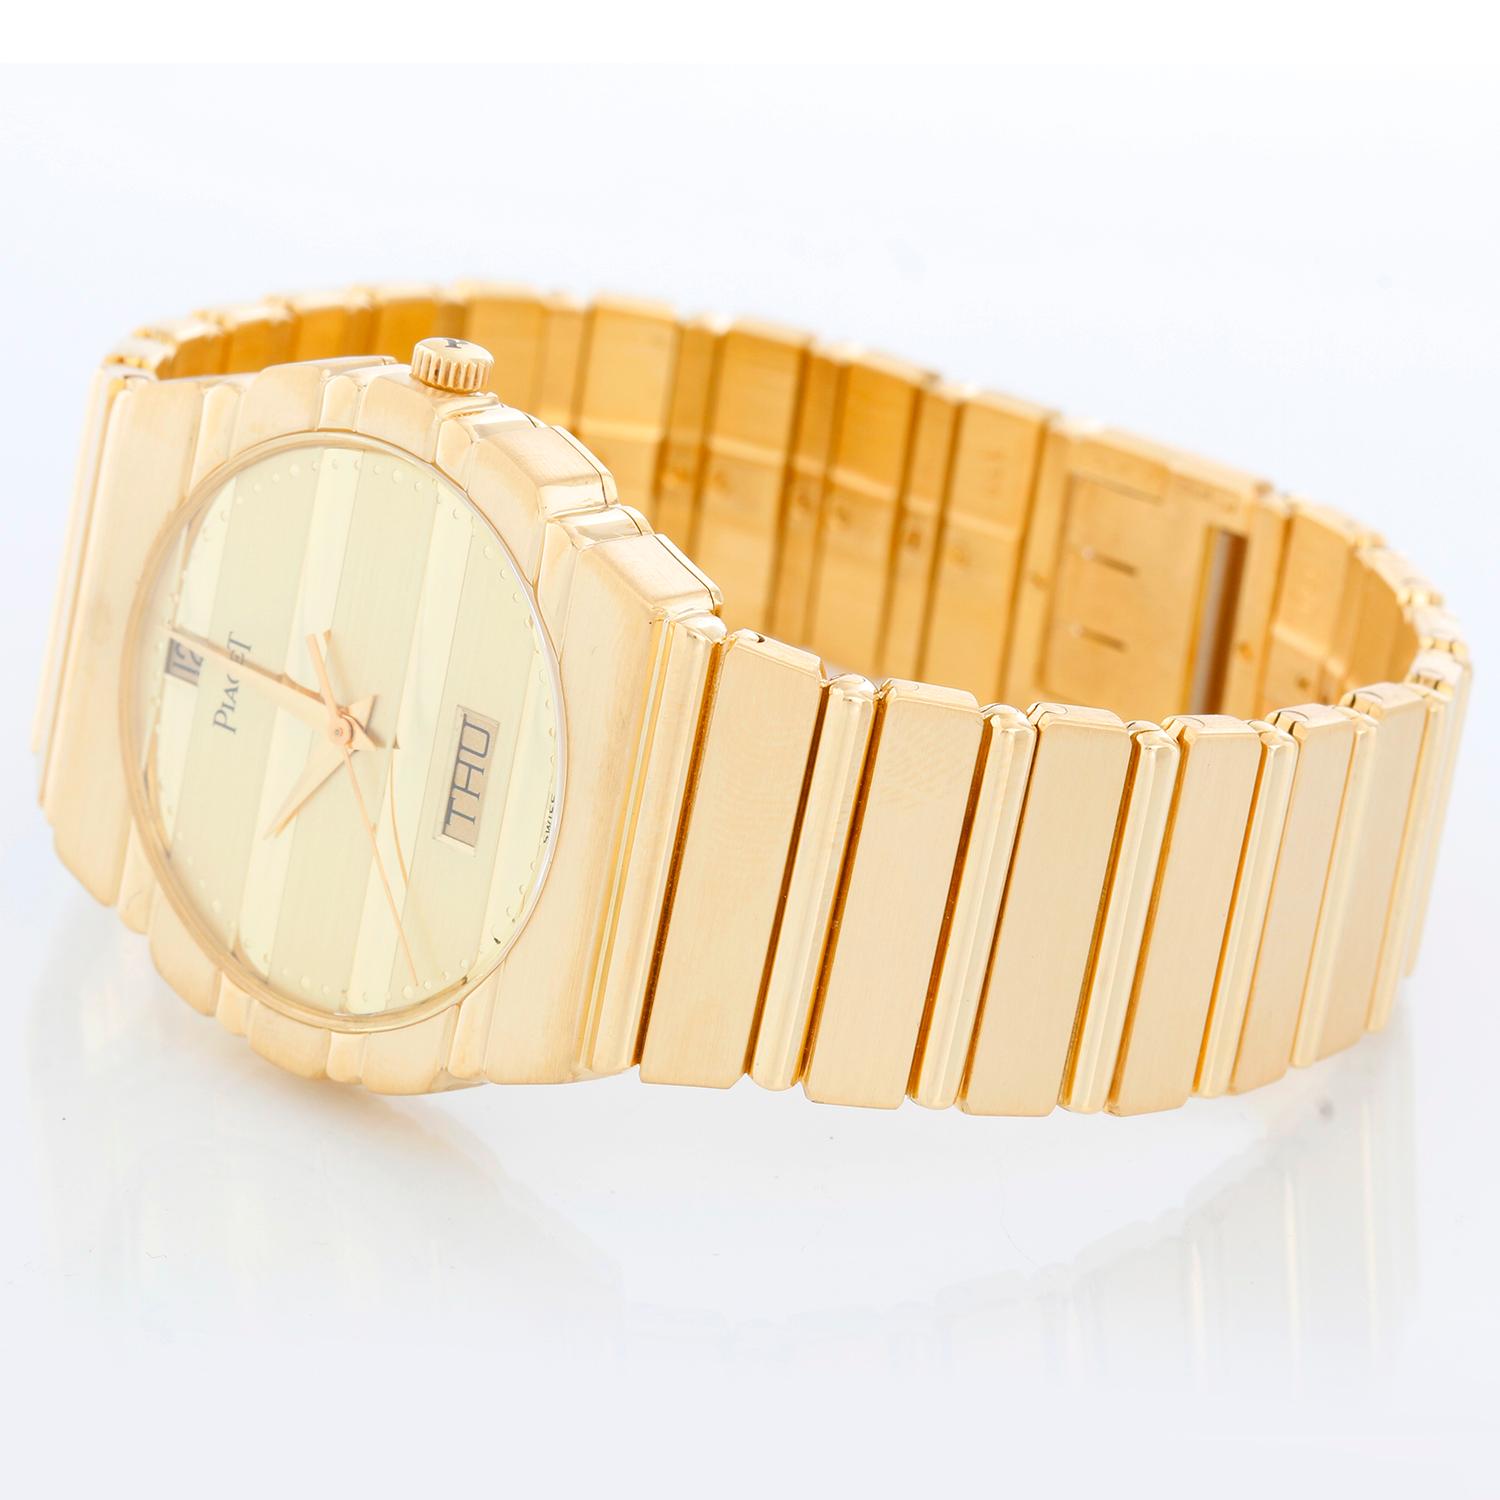 Piaget Polo Yellow Gold Watch with Day & Date Men's Watch  15562 C701 - Quartz. 18K Yellow gold ( 31 mm ). Gold dial with day and date. 18K Yellow Gold Bracelet; will fit up to a 7 inch wrist . Pre-owned with Piaget box.